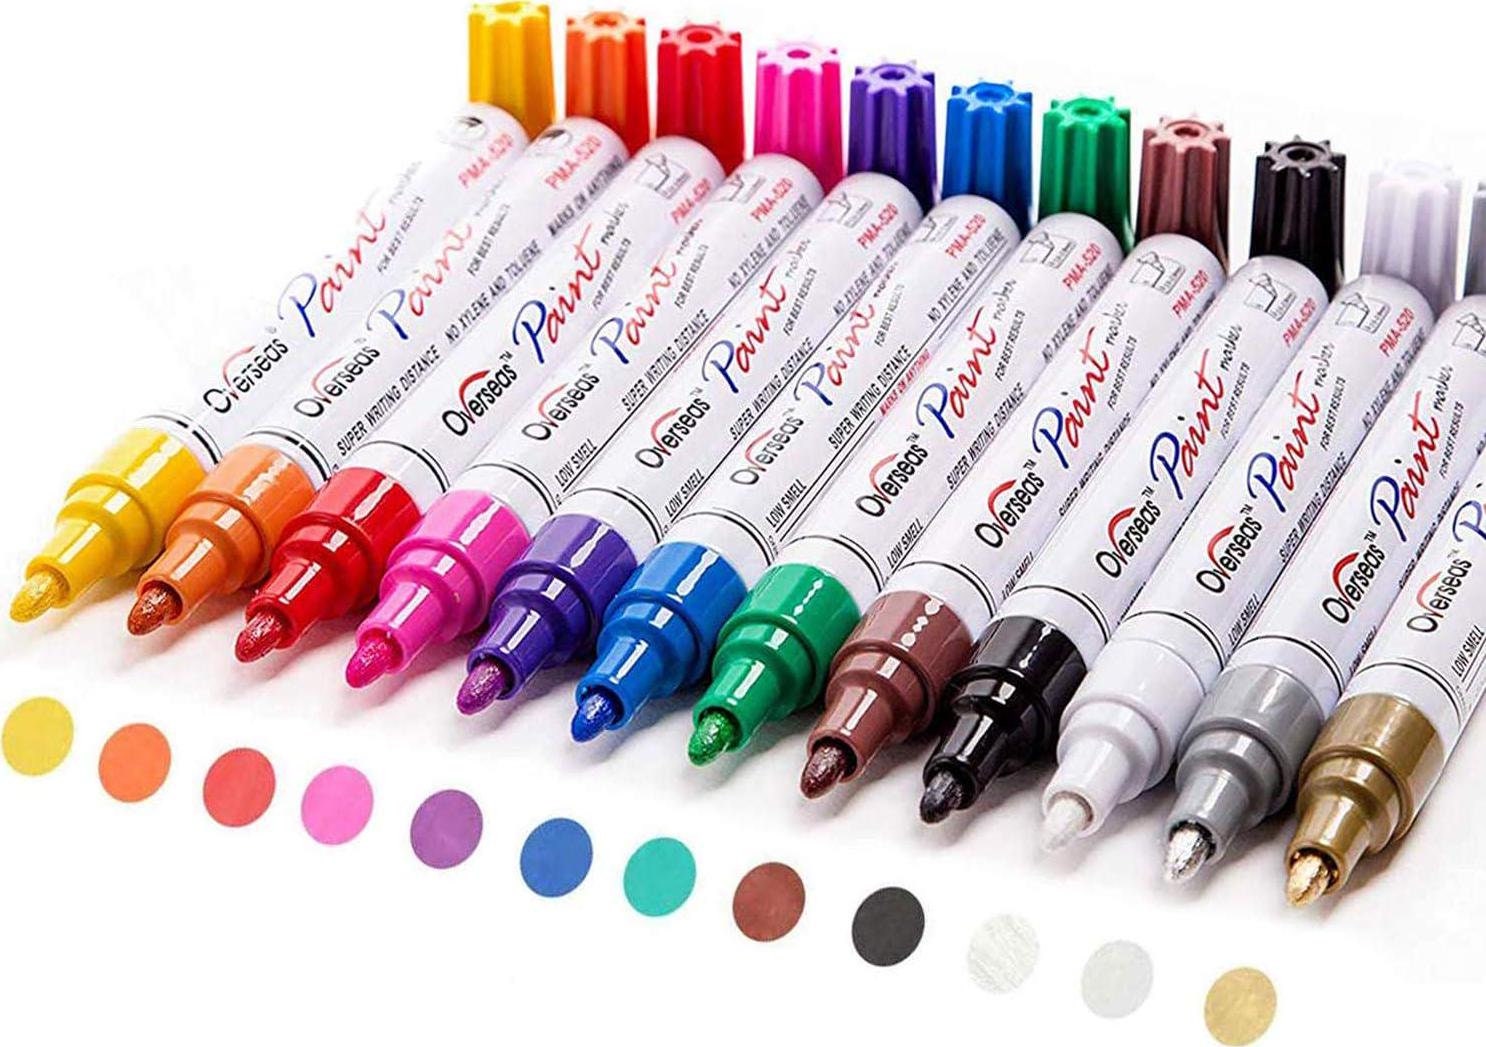 20 Pc Set Artistic Oil Based Markers Artistic Oil Based Pen Fine Tip Markers  Wood Painting Ceramic Painting Art Painting Freshie Makers 